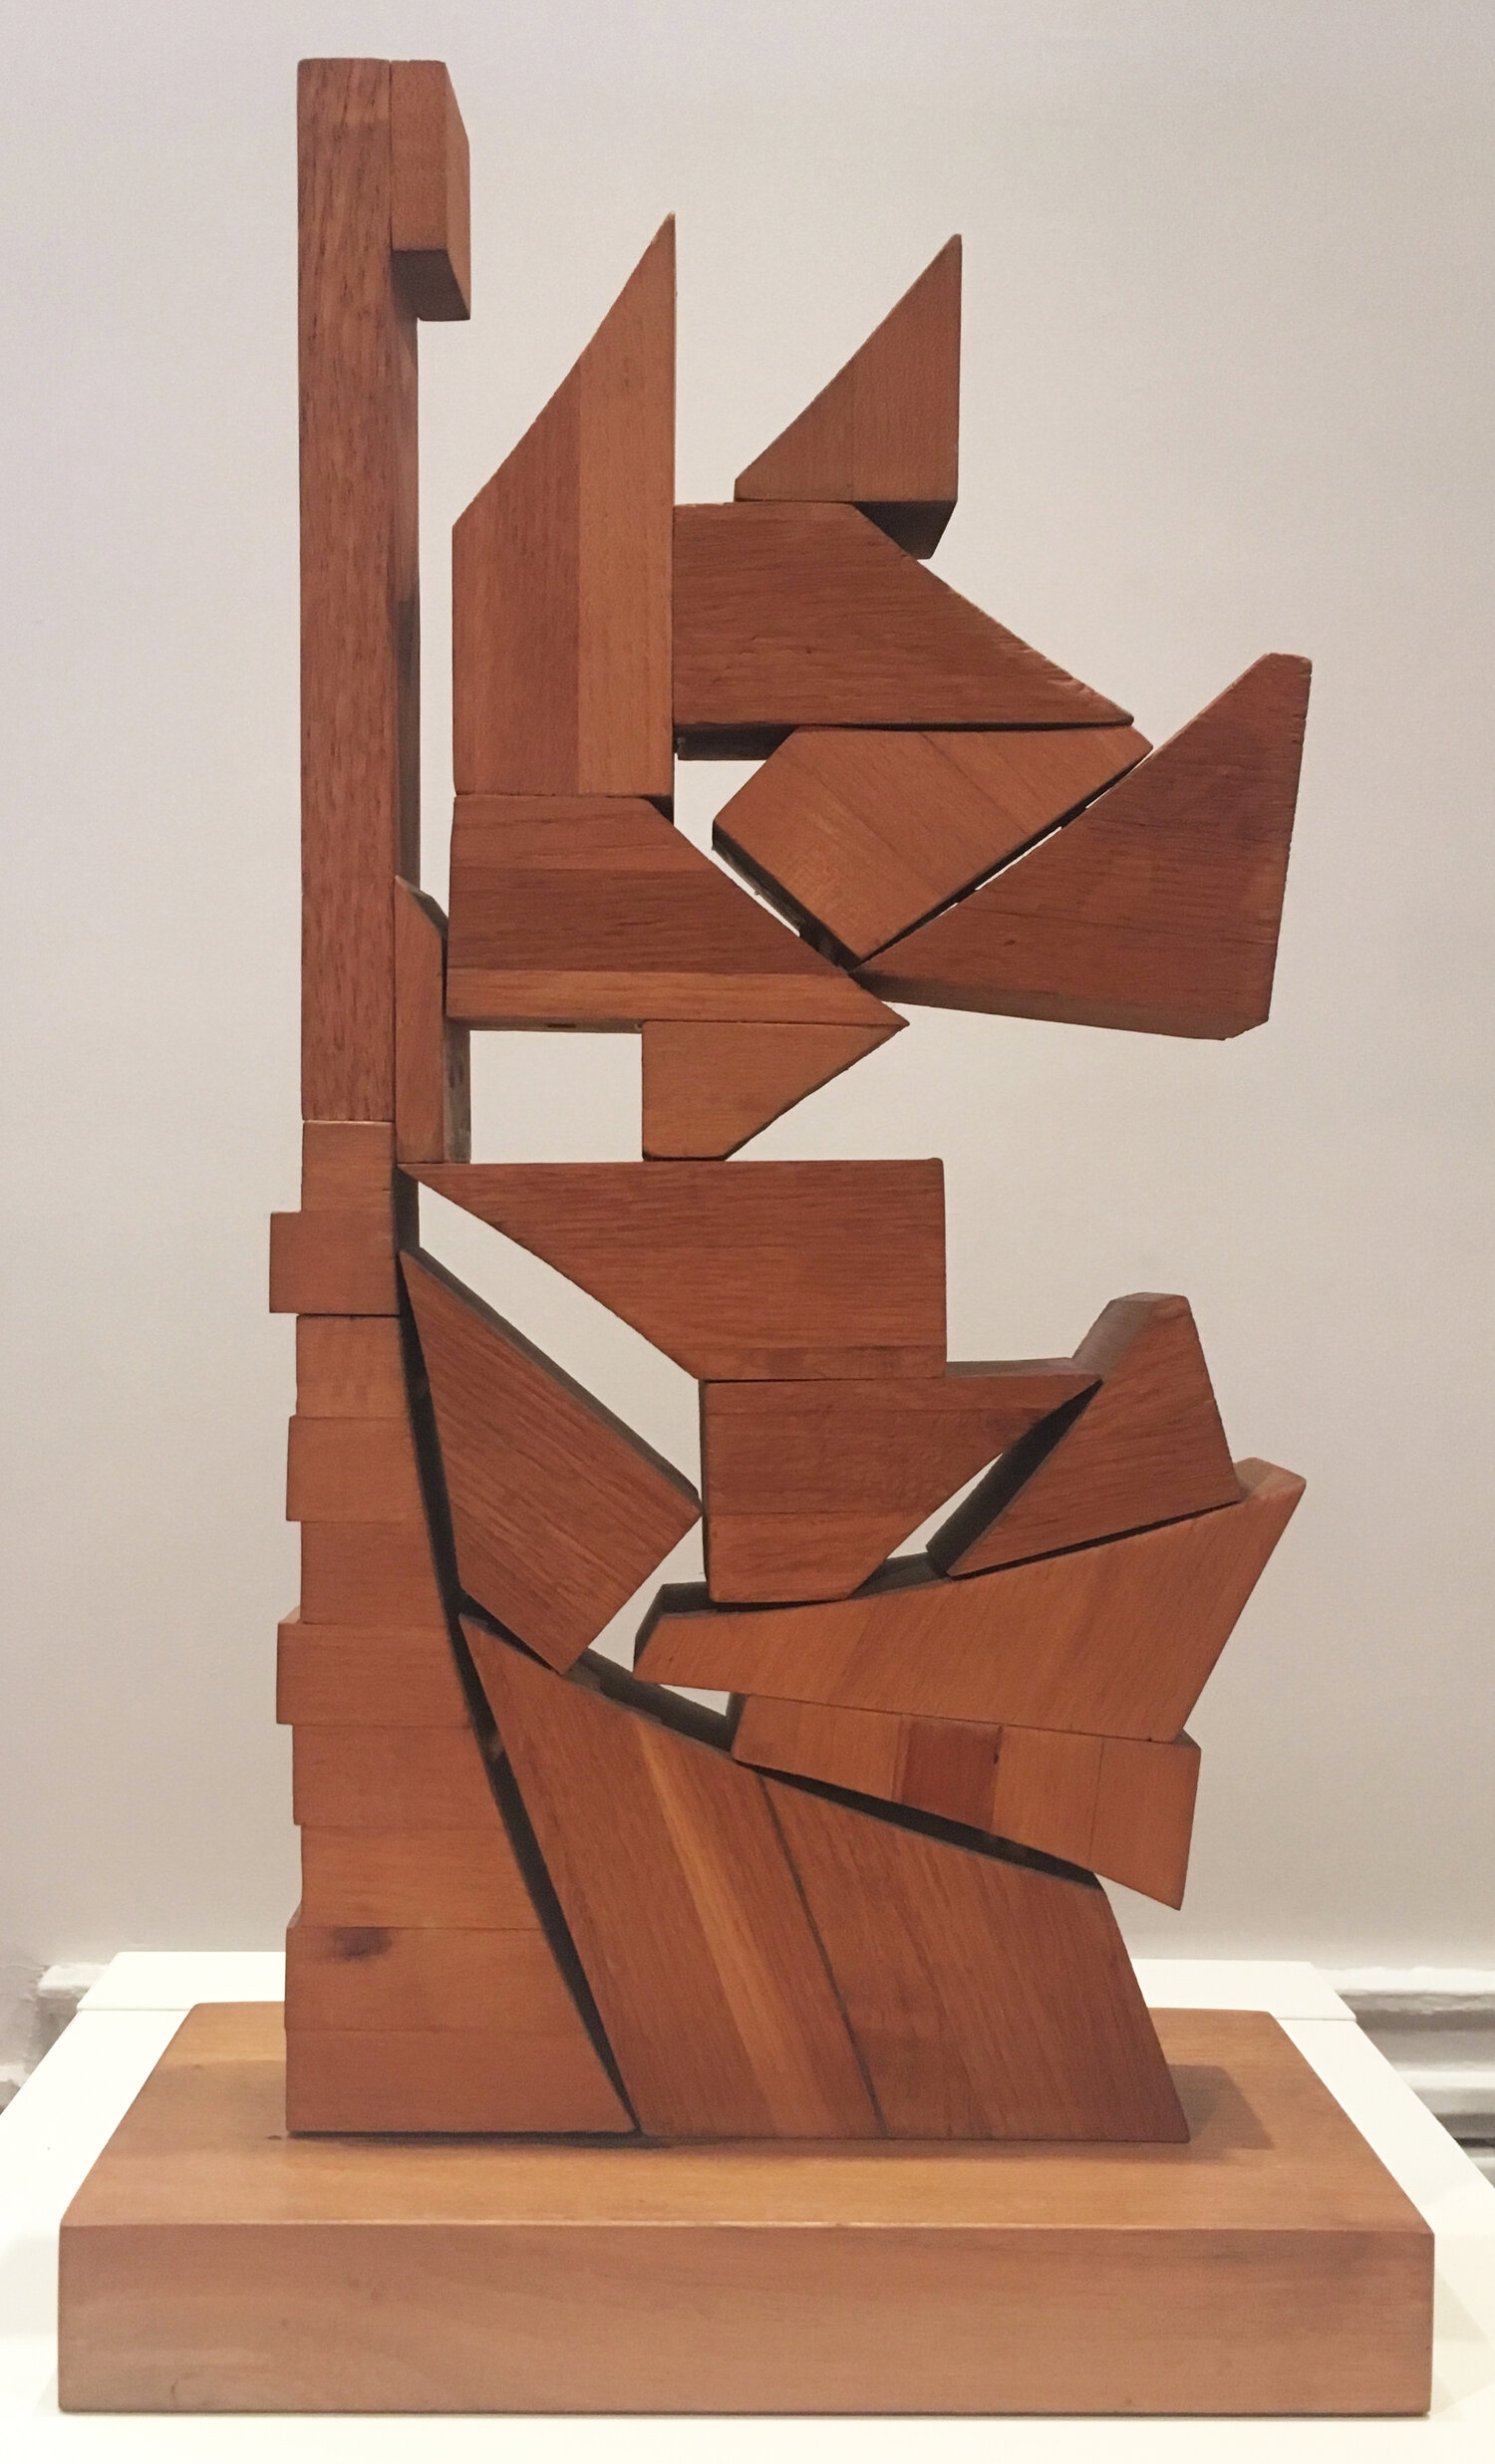 Abstract wood sculpture with geometric forms by Dorothy Dehner